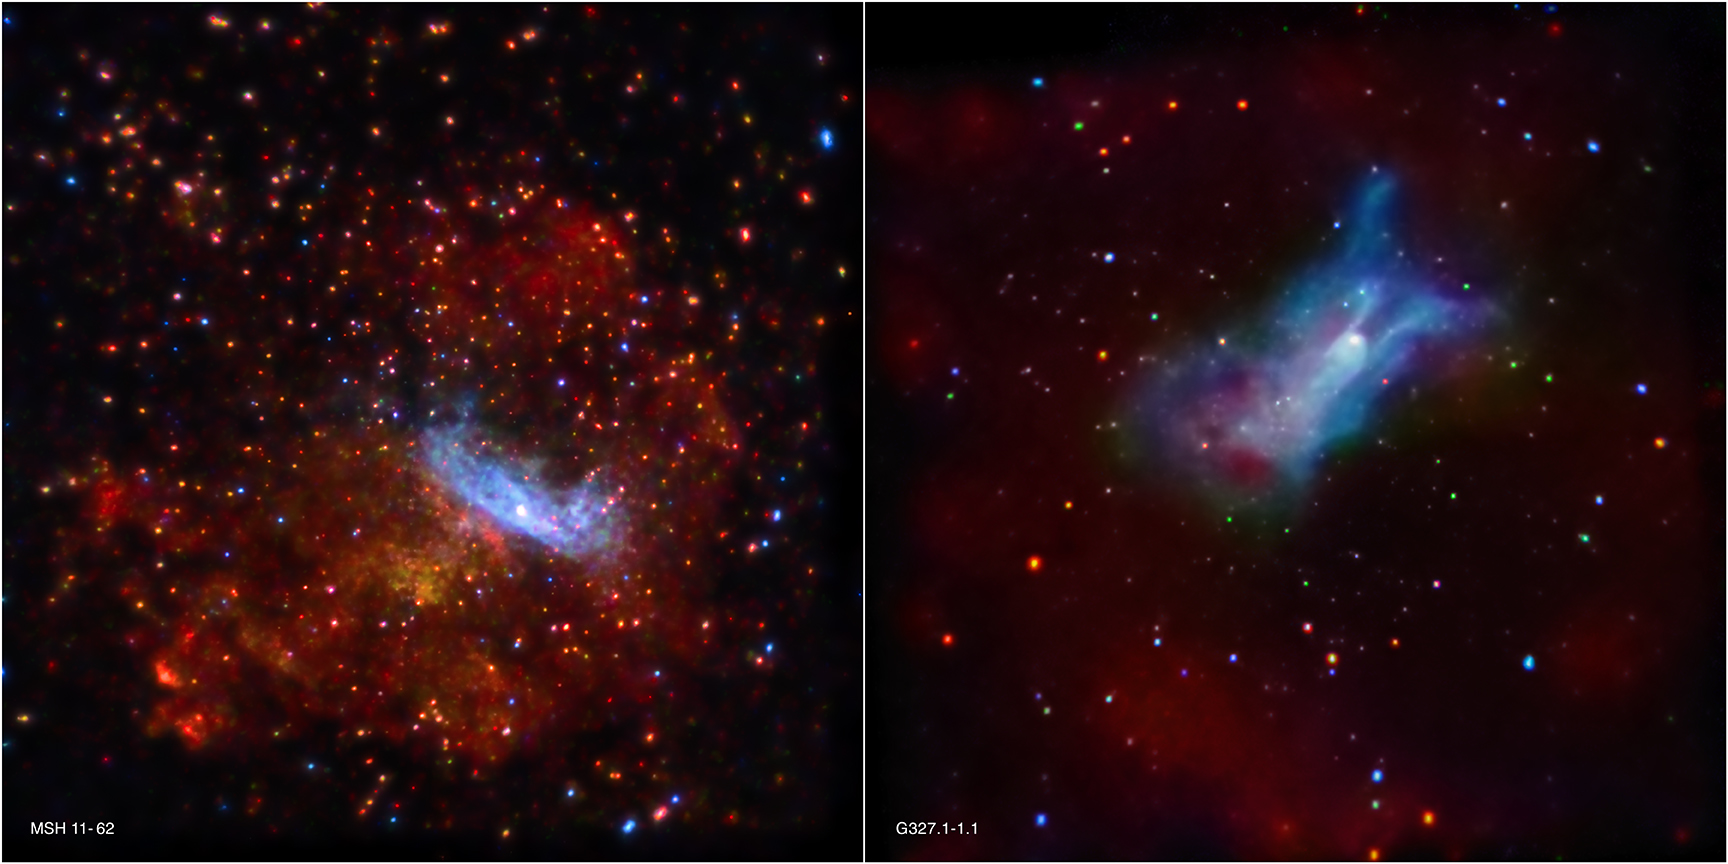 Two new Chandra images of supernova remnants reveal intricate structures left behind after massive stars exploded.